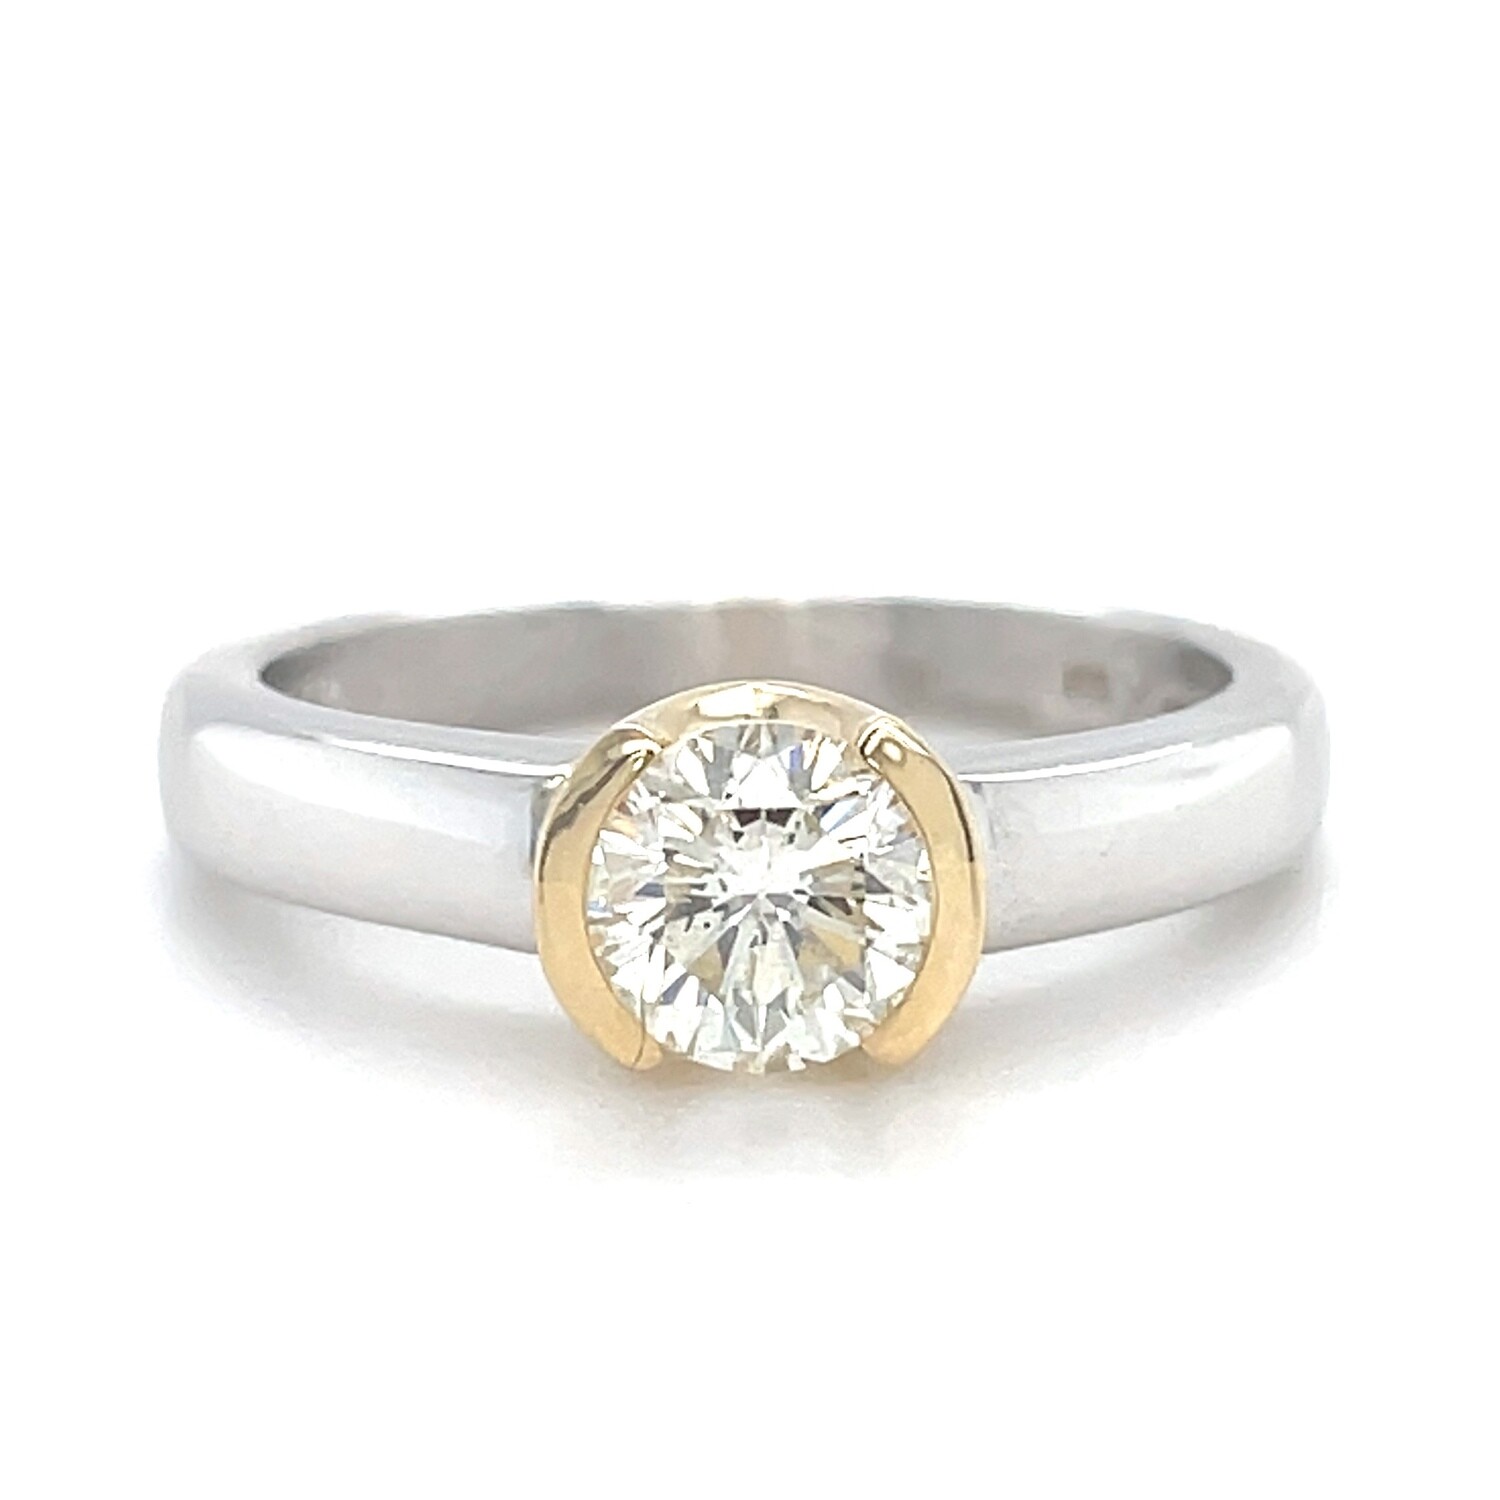 Diamond Solitaire Ring in 14k Yellow & White Gold — 0.79ct